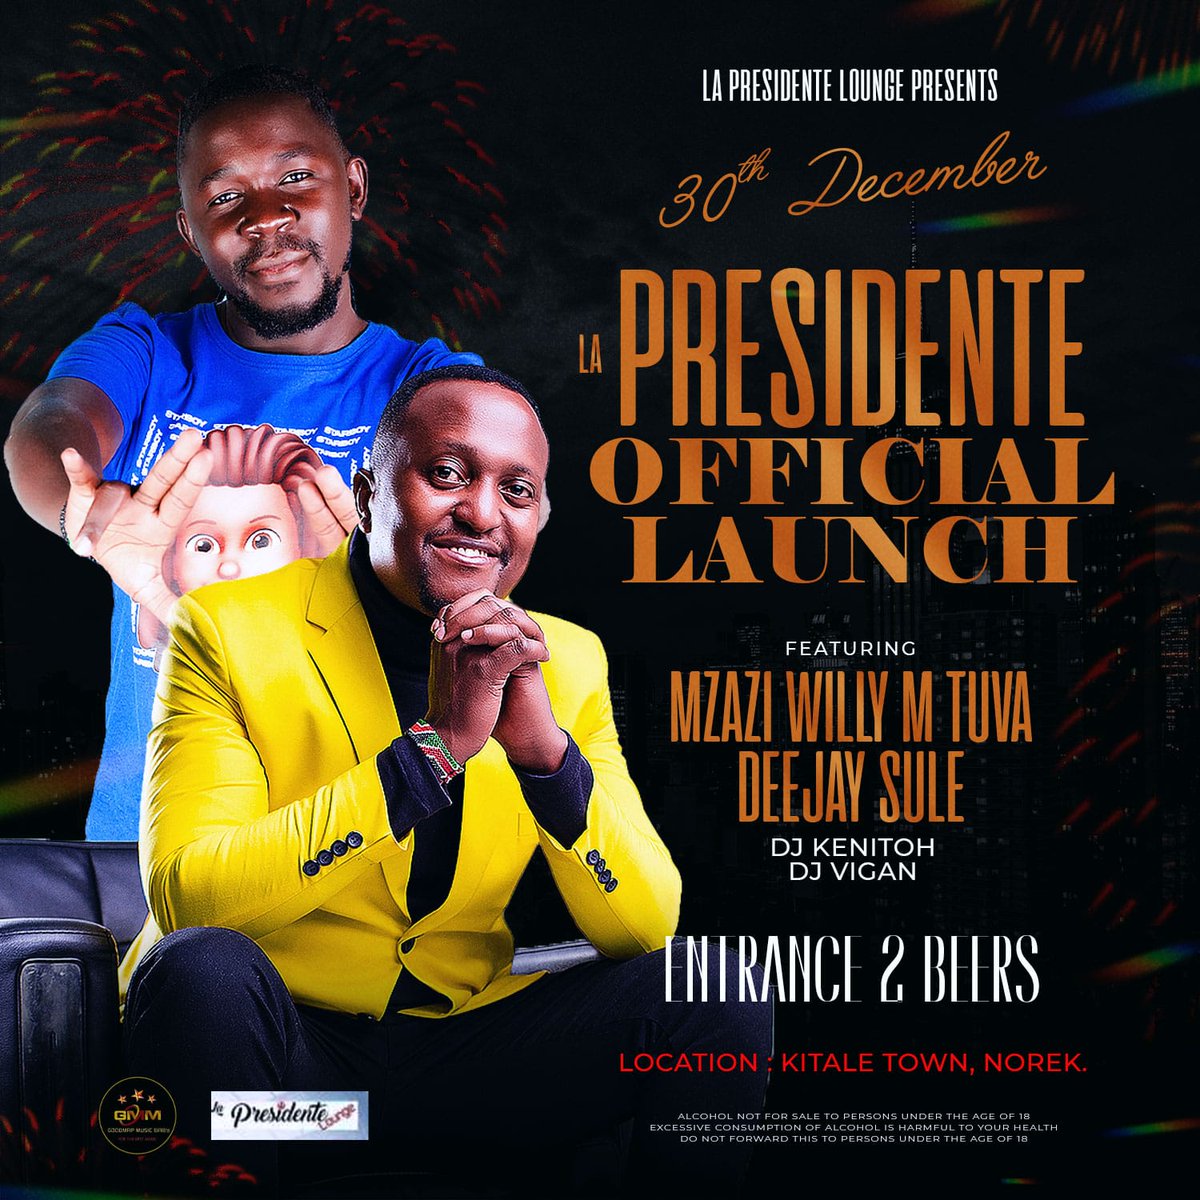 KITALE SATURDAY tupatane pale LA PRESIDENTE LOUNGE, NOREK!! It's going to be a night to remember as we launch Trans Nzoia's entertainment hub with @djsulekenya !!! Njoo tupige sherehe!! SATURDAY 30TH DECEMBER | LA PRESIDENTE LOUNGE, NOREK | KITALE